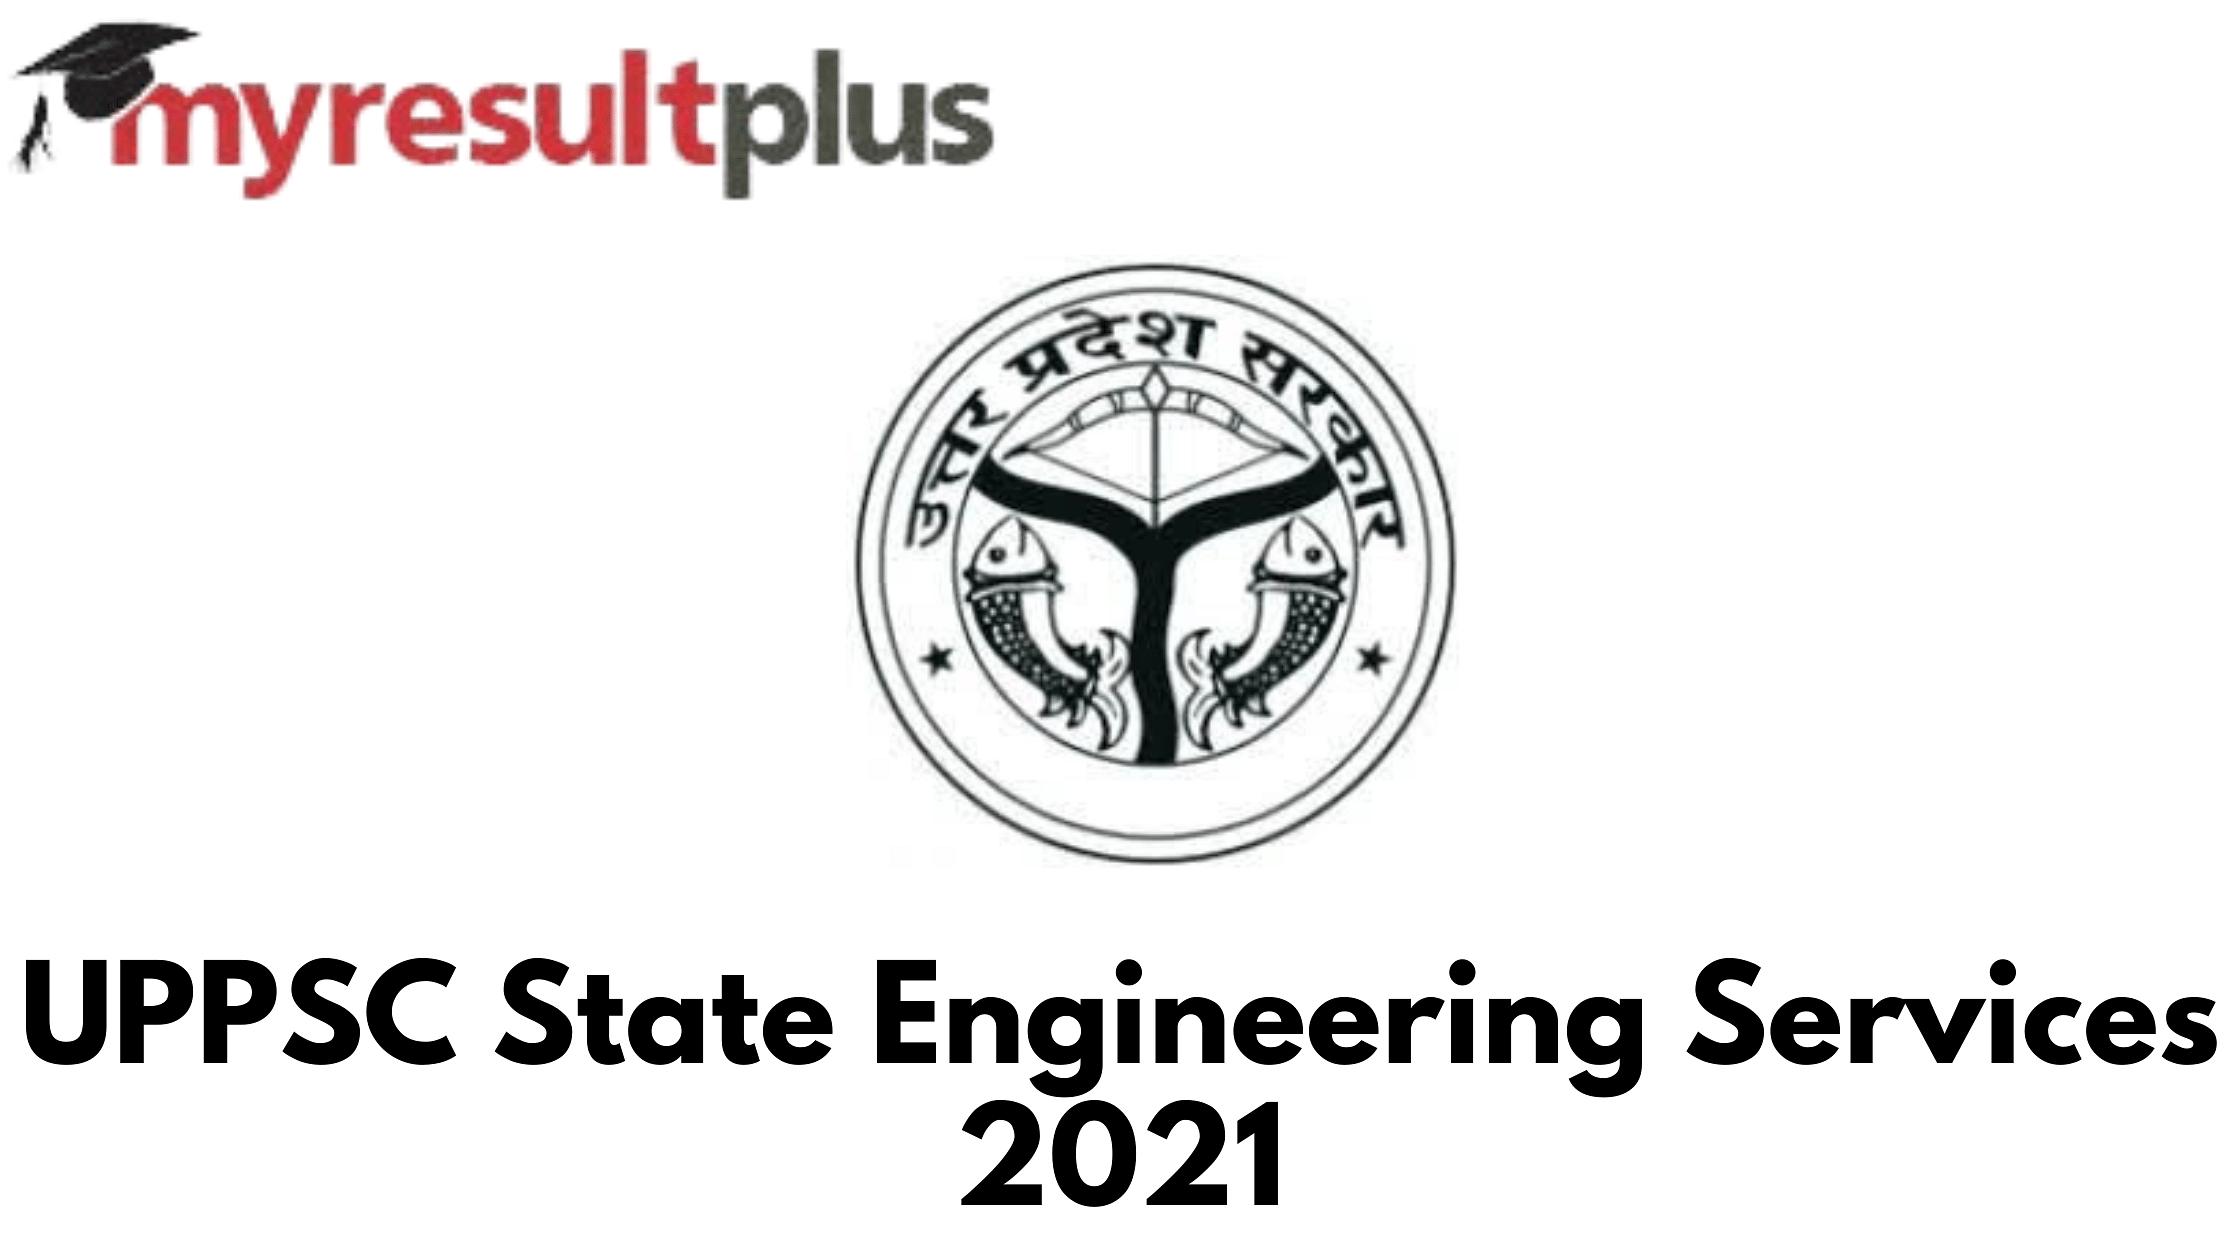 UPPSC State Engineering Services Recruitment 2021: Interview Dates Out, Know Details Here